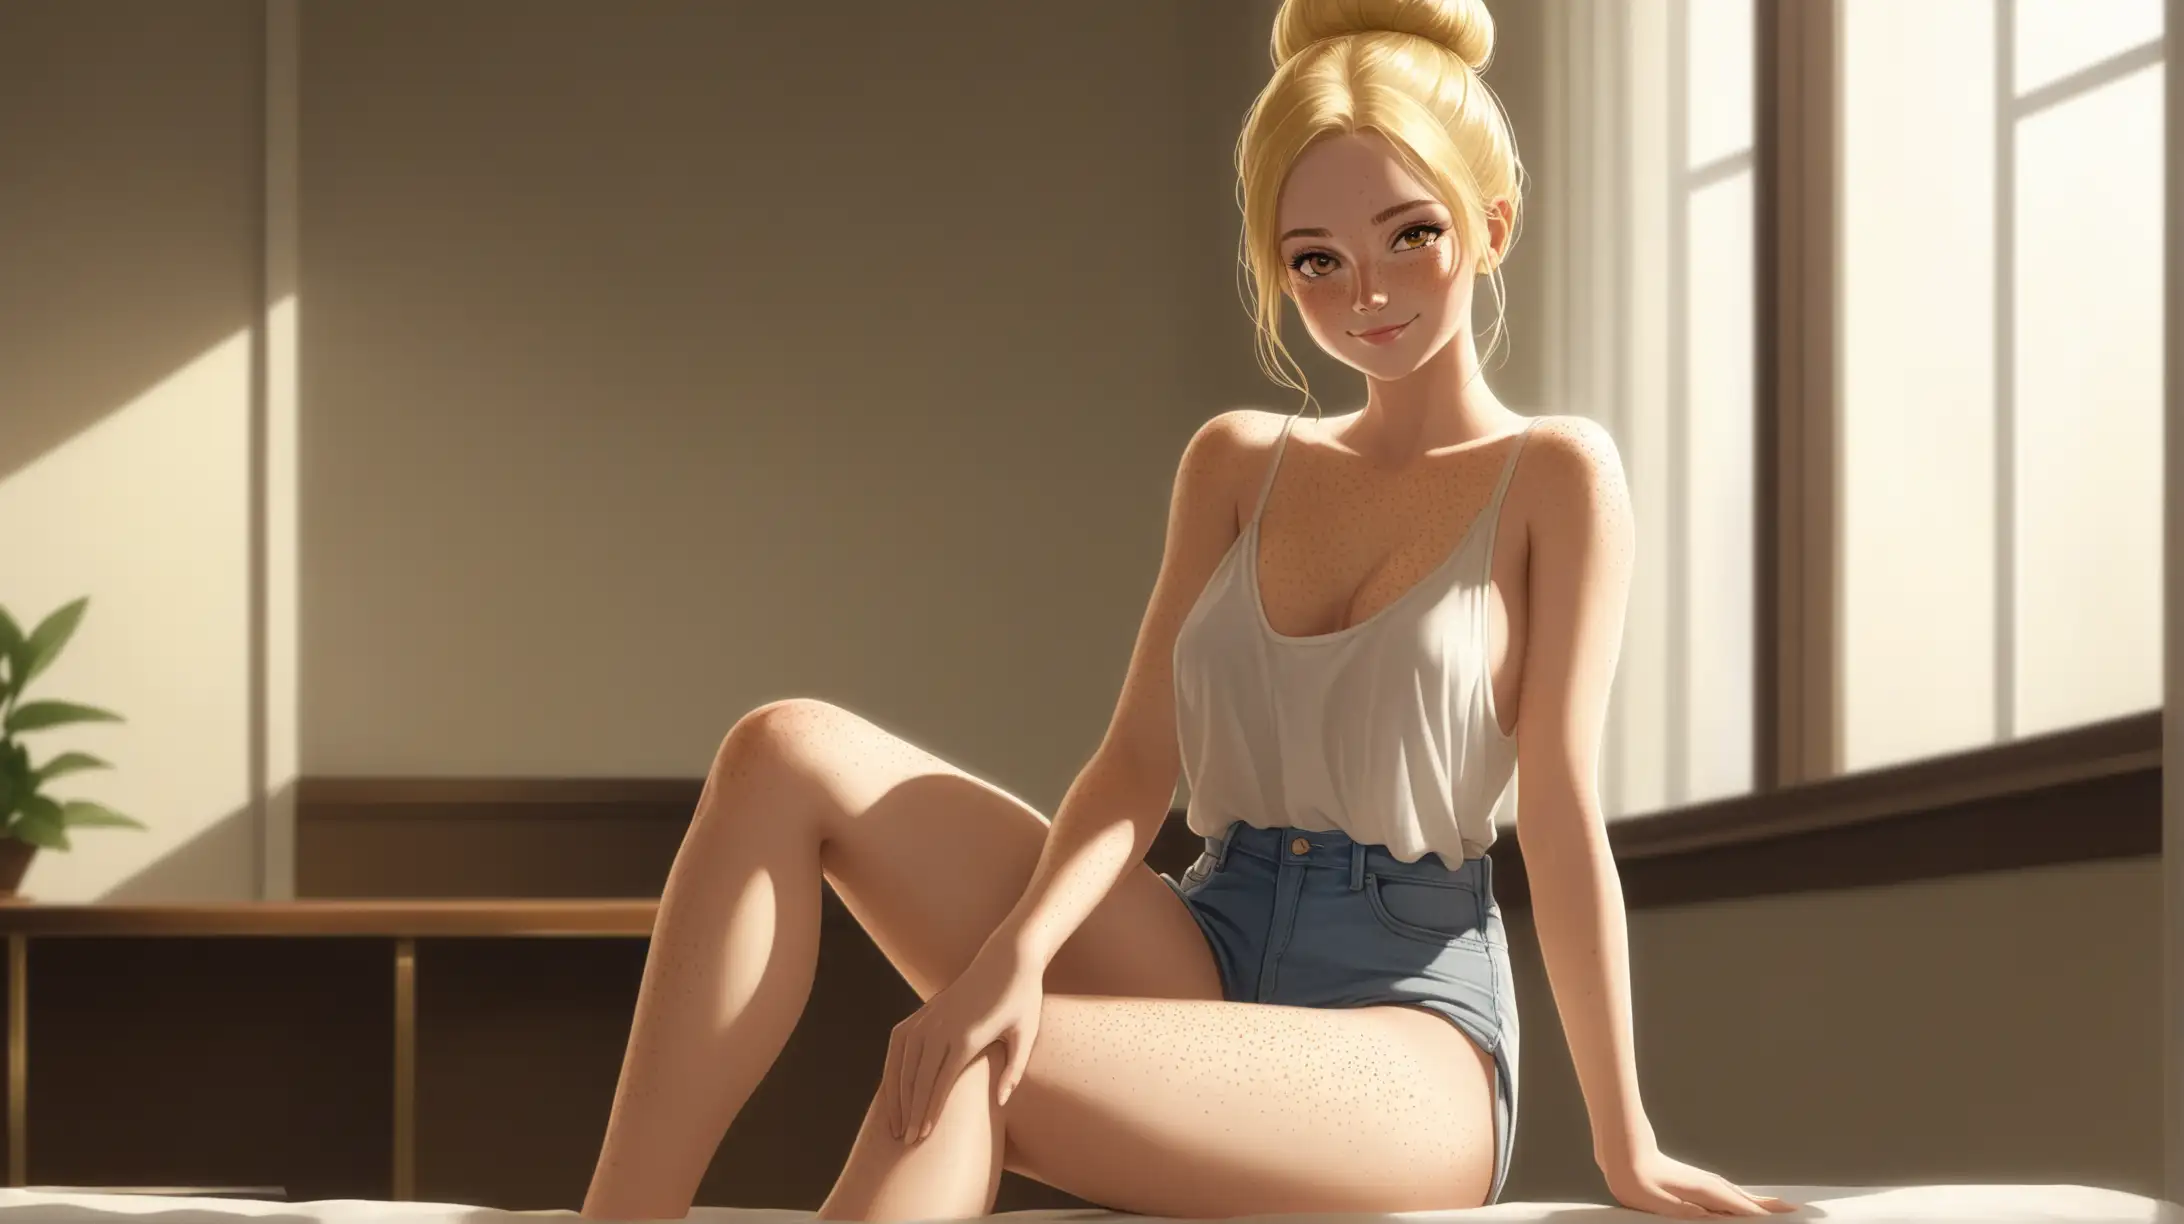 Draw a woman, long blonde hair in a bun, gold eyes, freckles, perky figure, relaxed outfit, high quality, long shot, indoors, seductive, sitting, natural lighting, smiling at the viewer